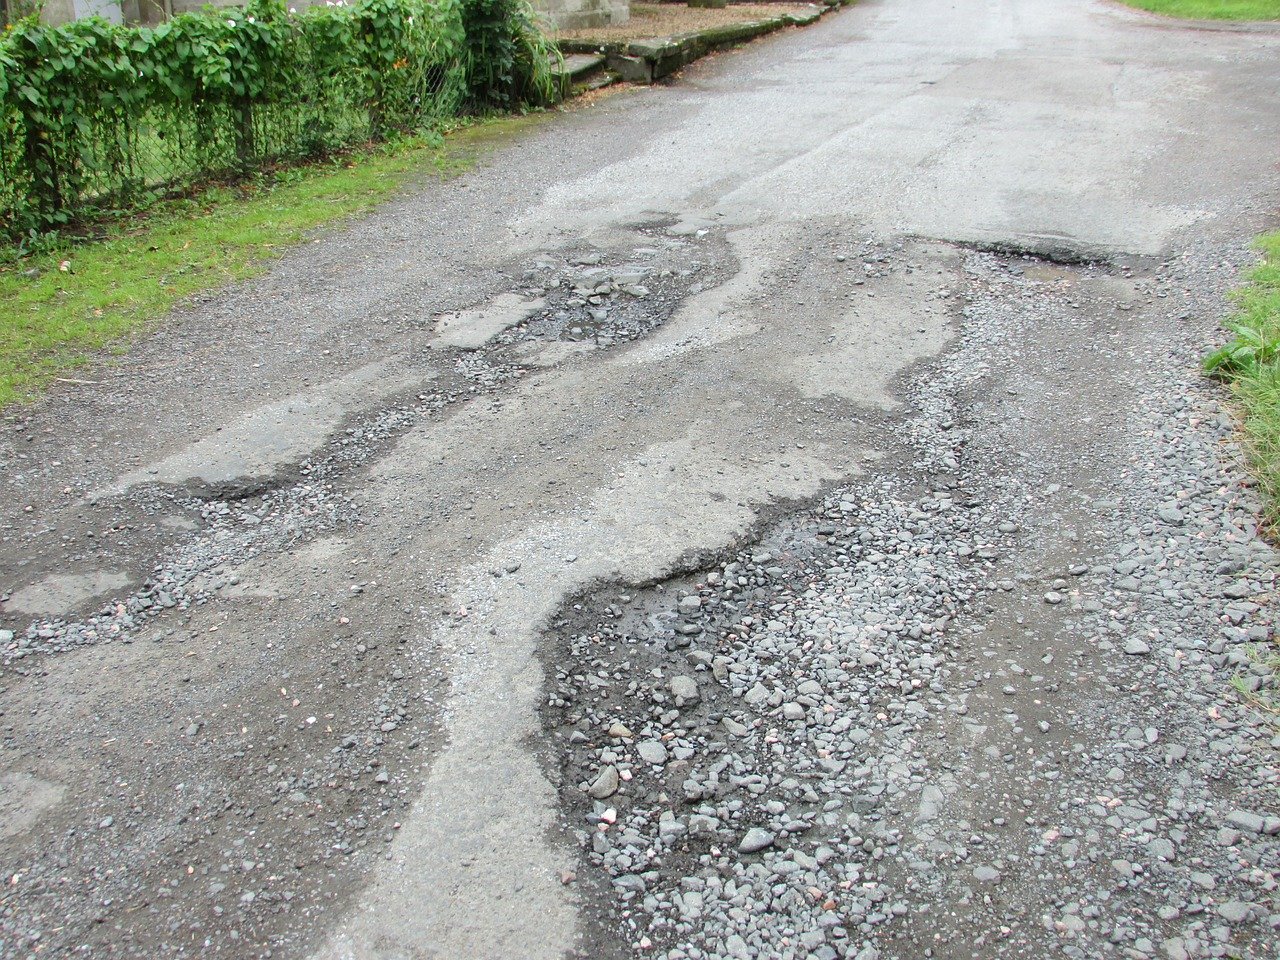 NEWS | Over £6 million of funding given to Herefordshire Council to tackle potholes